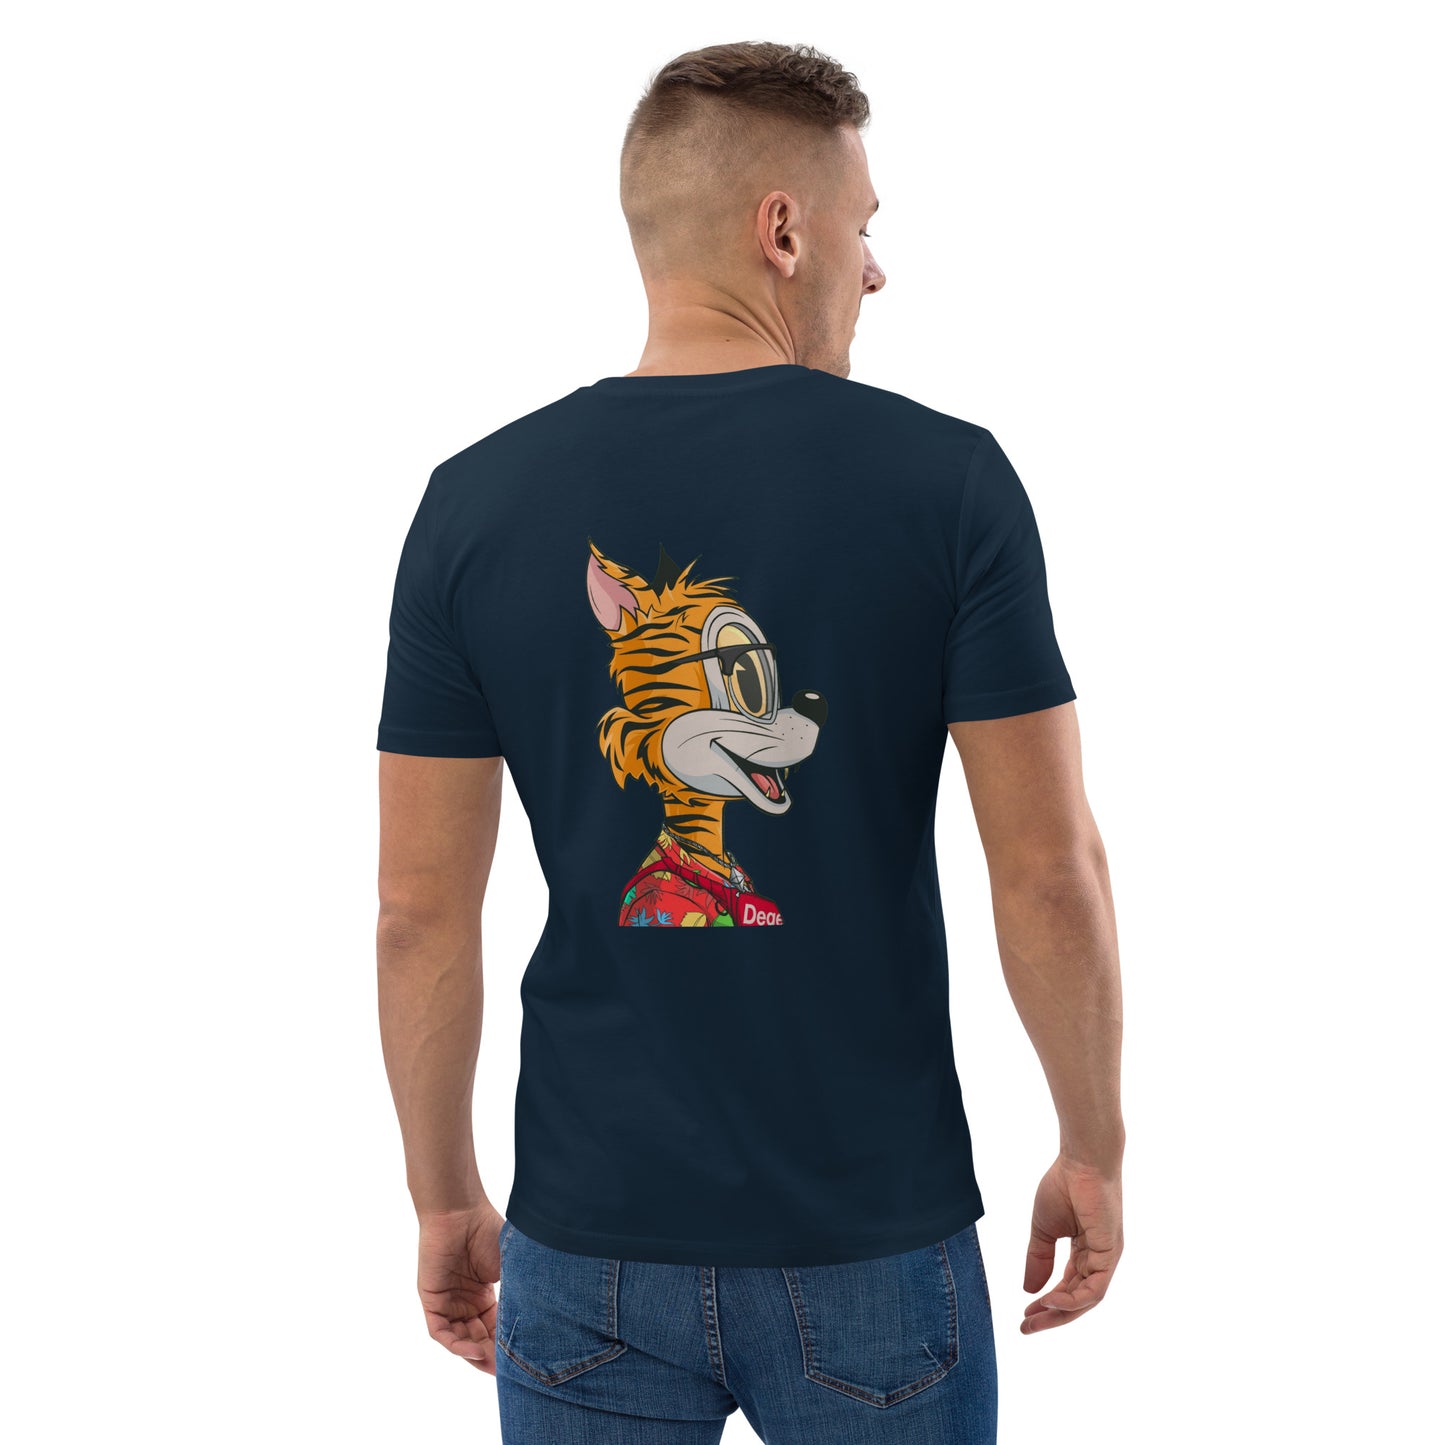 Unisex organic cotton t-shirt feat TOON #918 (front embroidered + rear print)